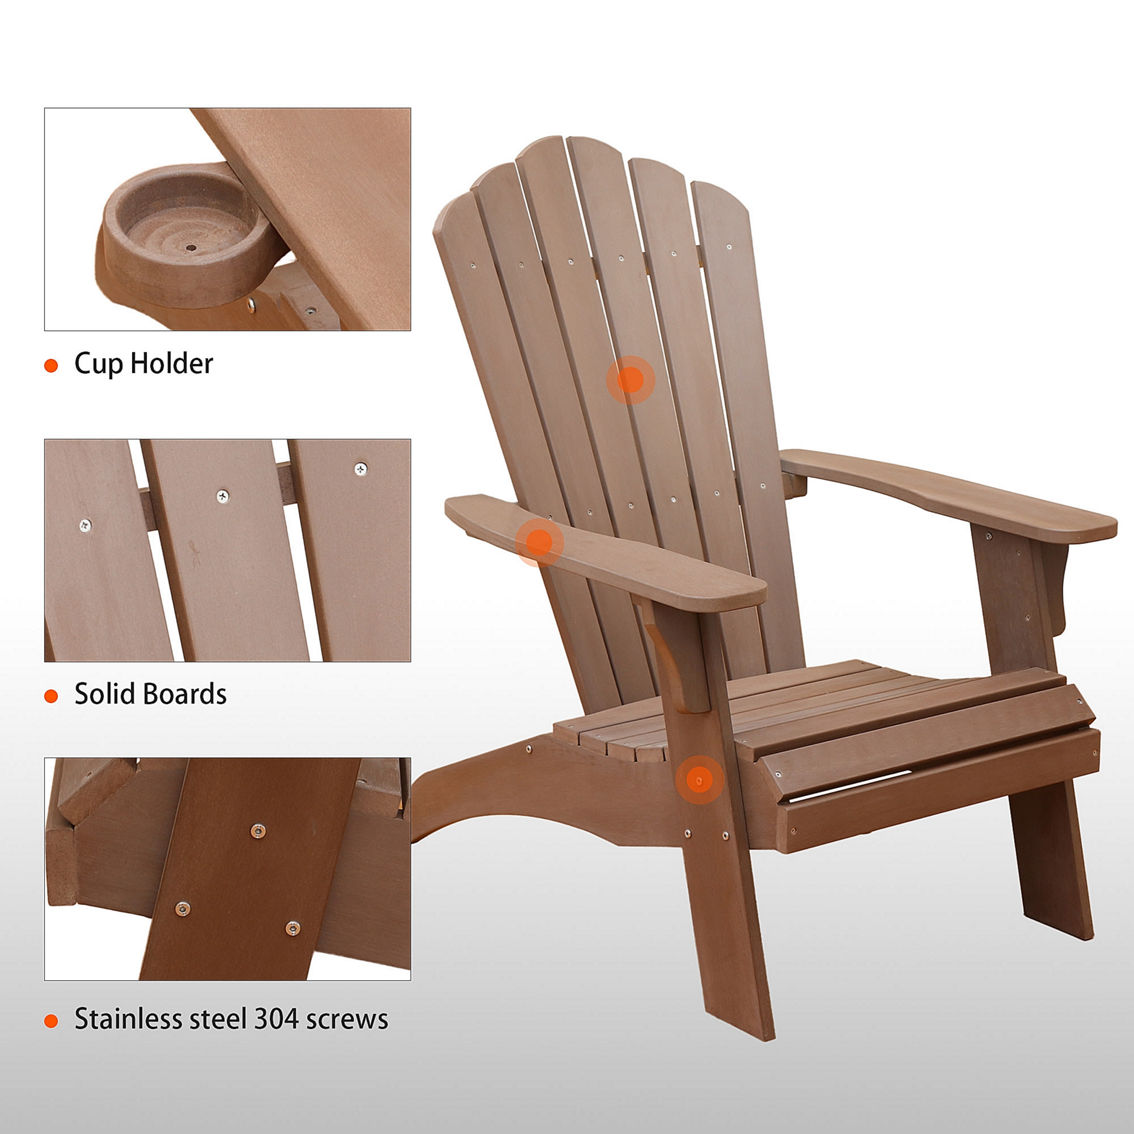 Upland Weatherproof Adirondack Chair with Polystyrene Composite Material - Image 2 of 5